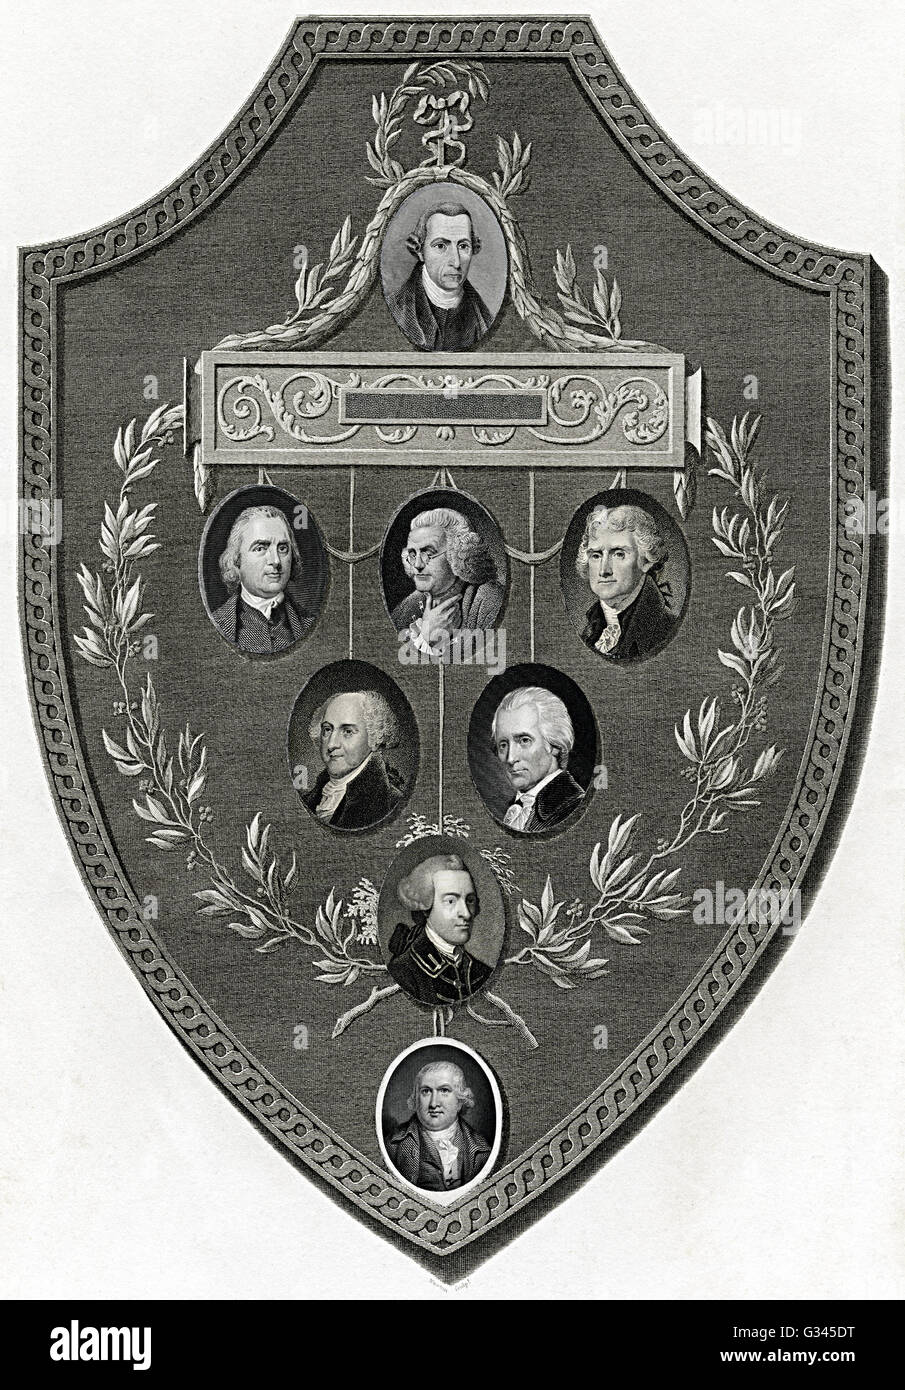 Shield with inset portraits of Franklin, Jefferson, Adams and more presidents Stock Photo